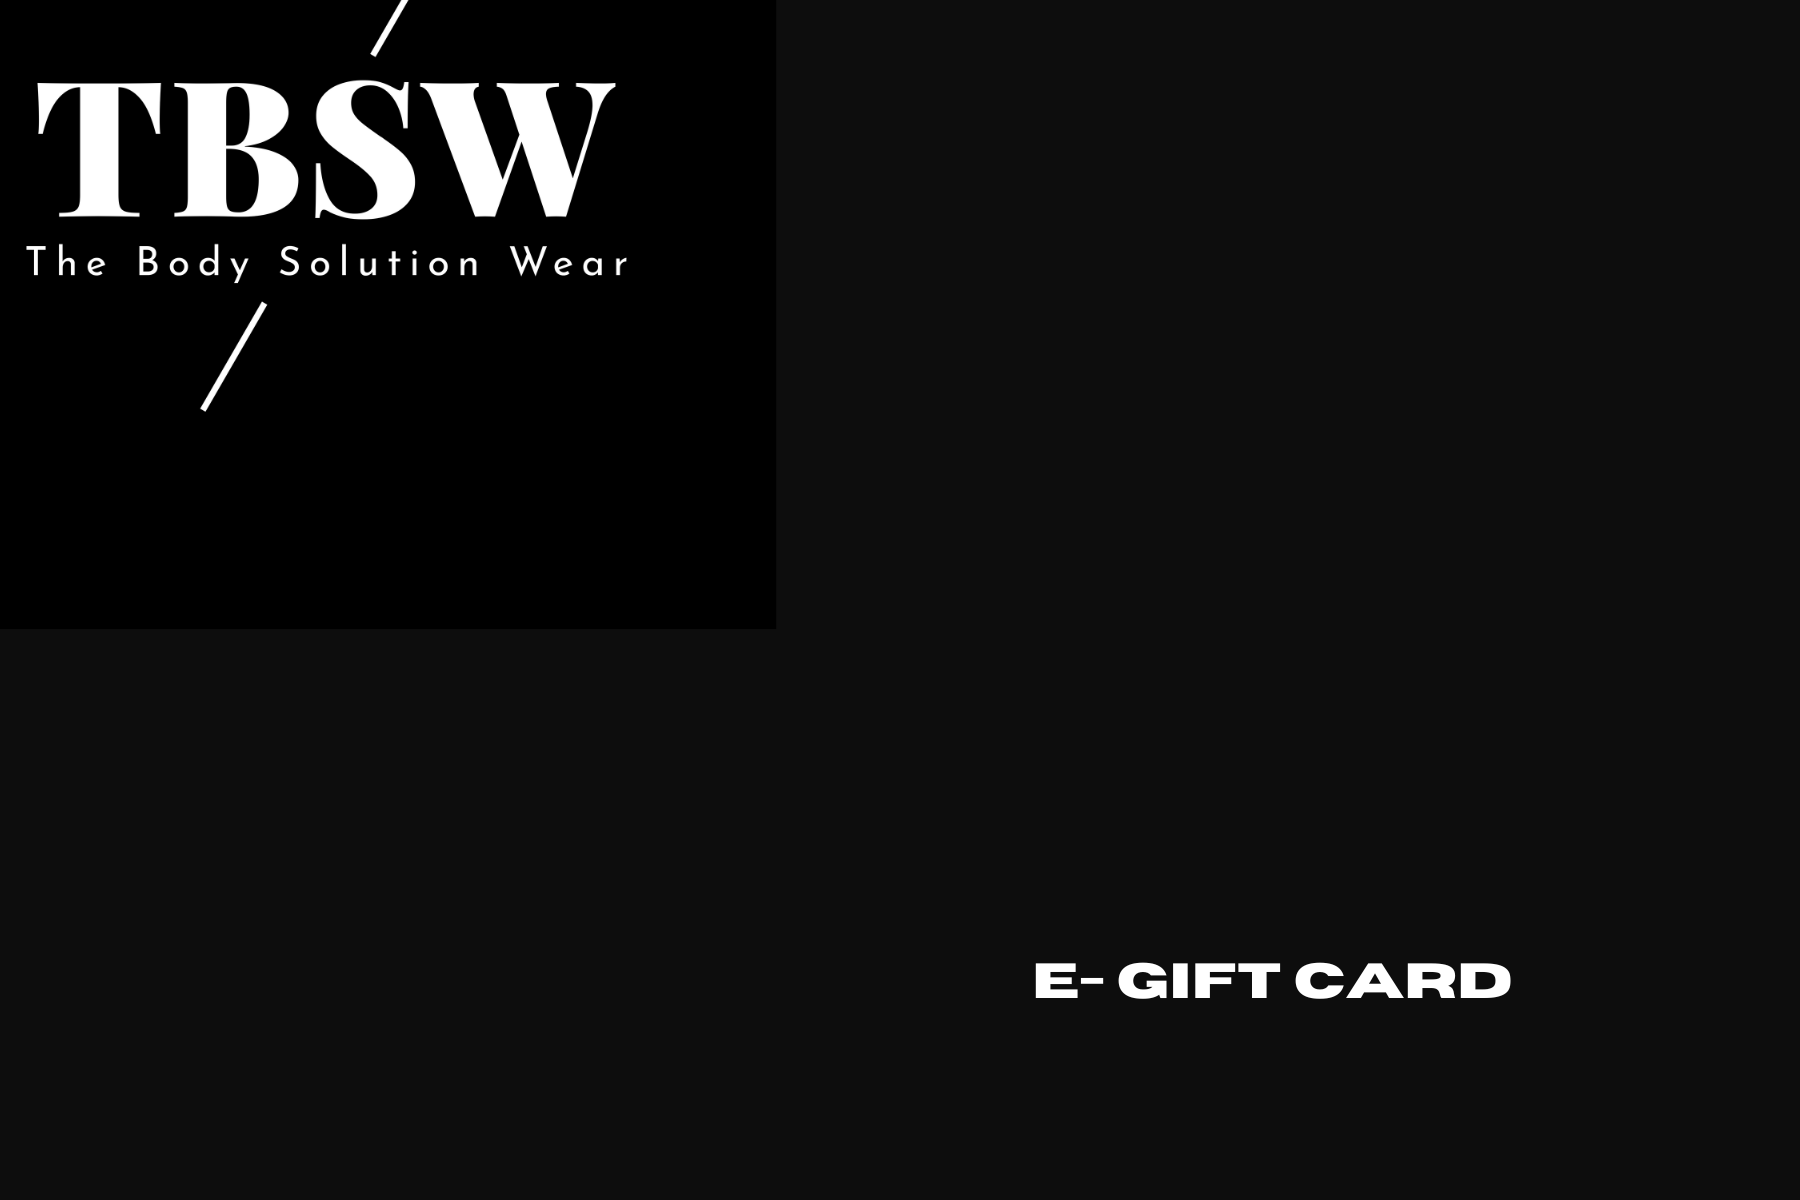 £50 GIFT CARD - TBSW